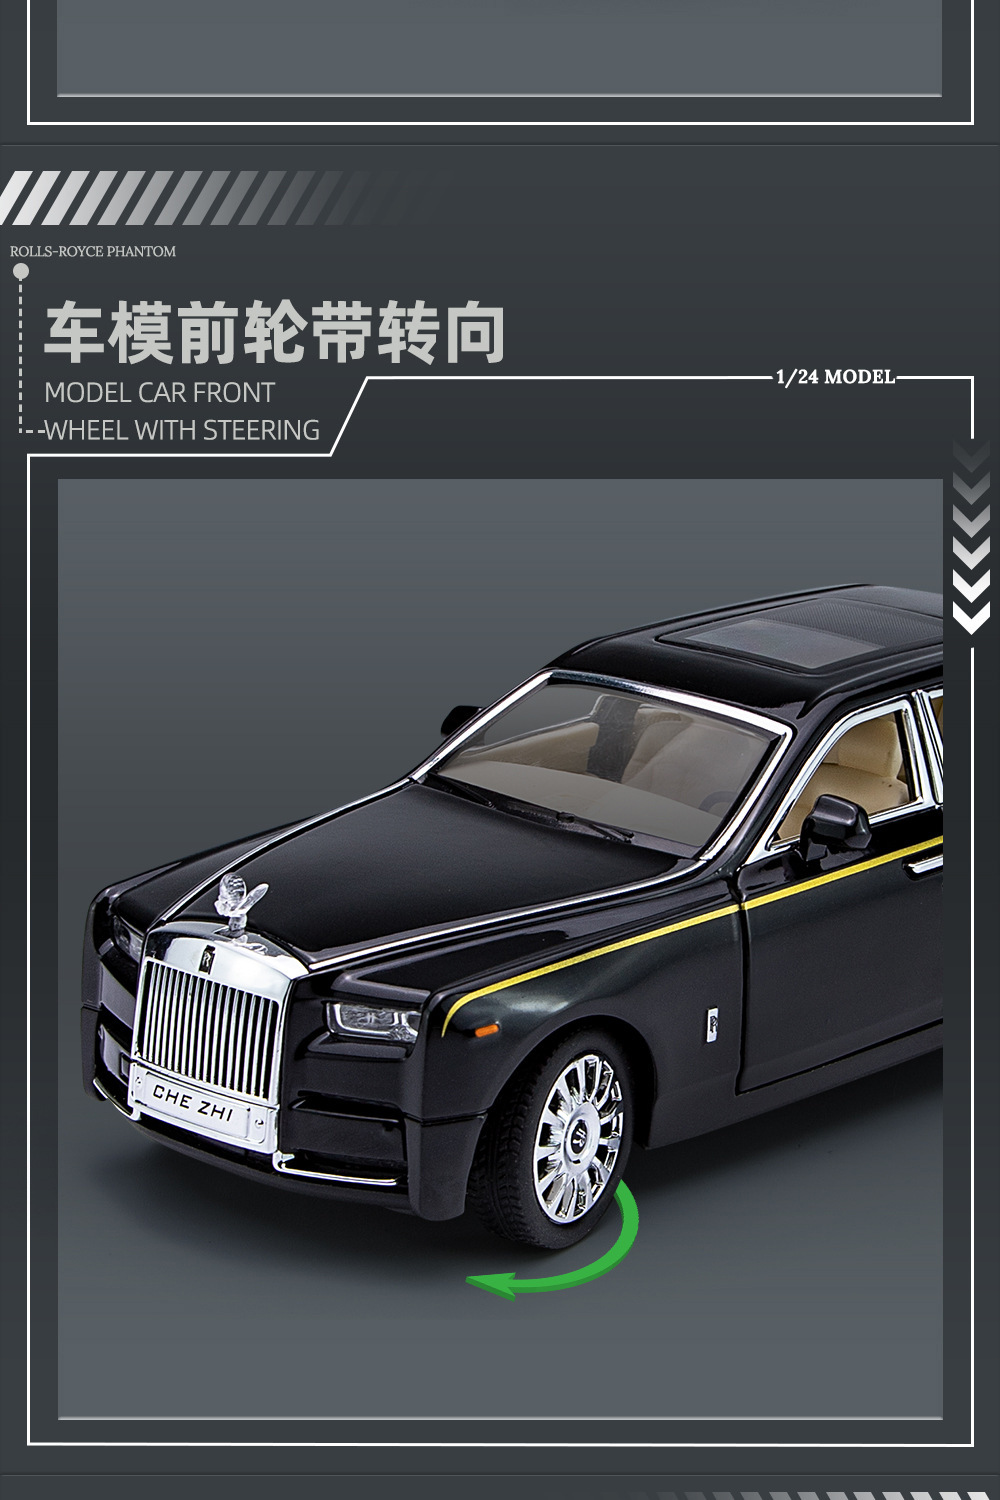 Bloomingworld toys RollsRoyce Phantom Model Car Pull Back Toy car with  Sound and Light  RollsRoyce Phantom Model Car Pull Back Toy car with  Sound and Light  shop for Bloomingworld toys